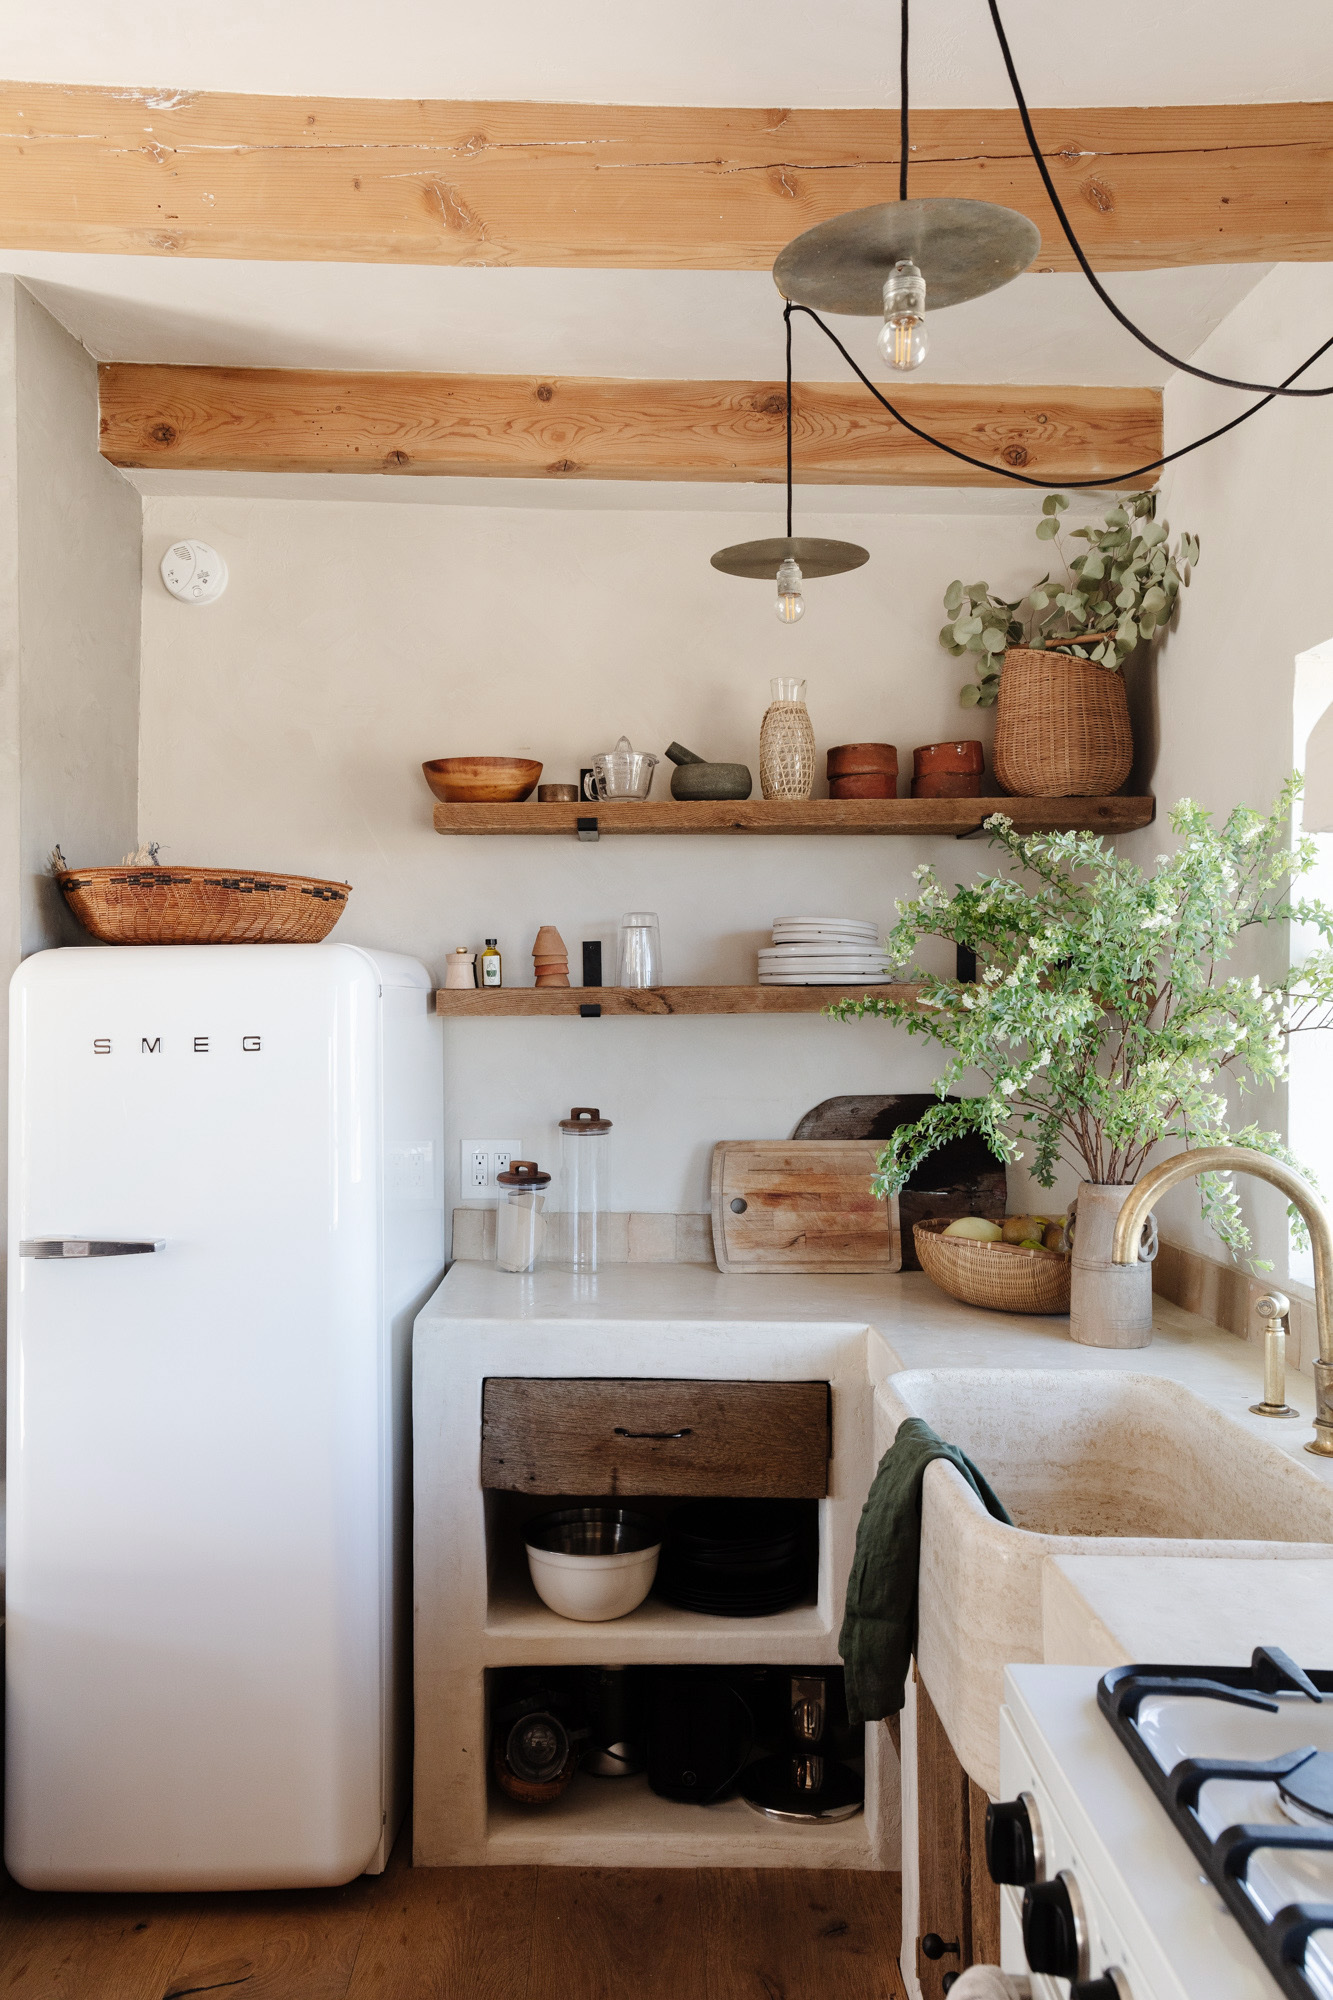 Tour a Compact, Neutral Kitchen in a 1940s Mojave Desert Home